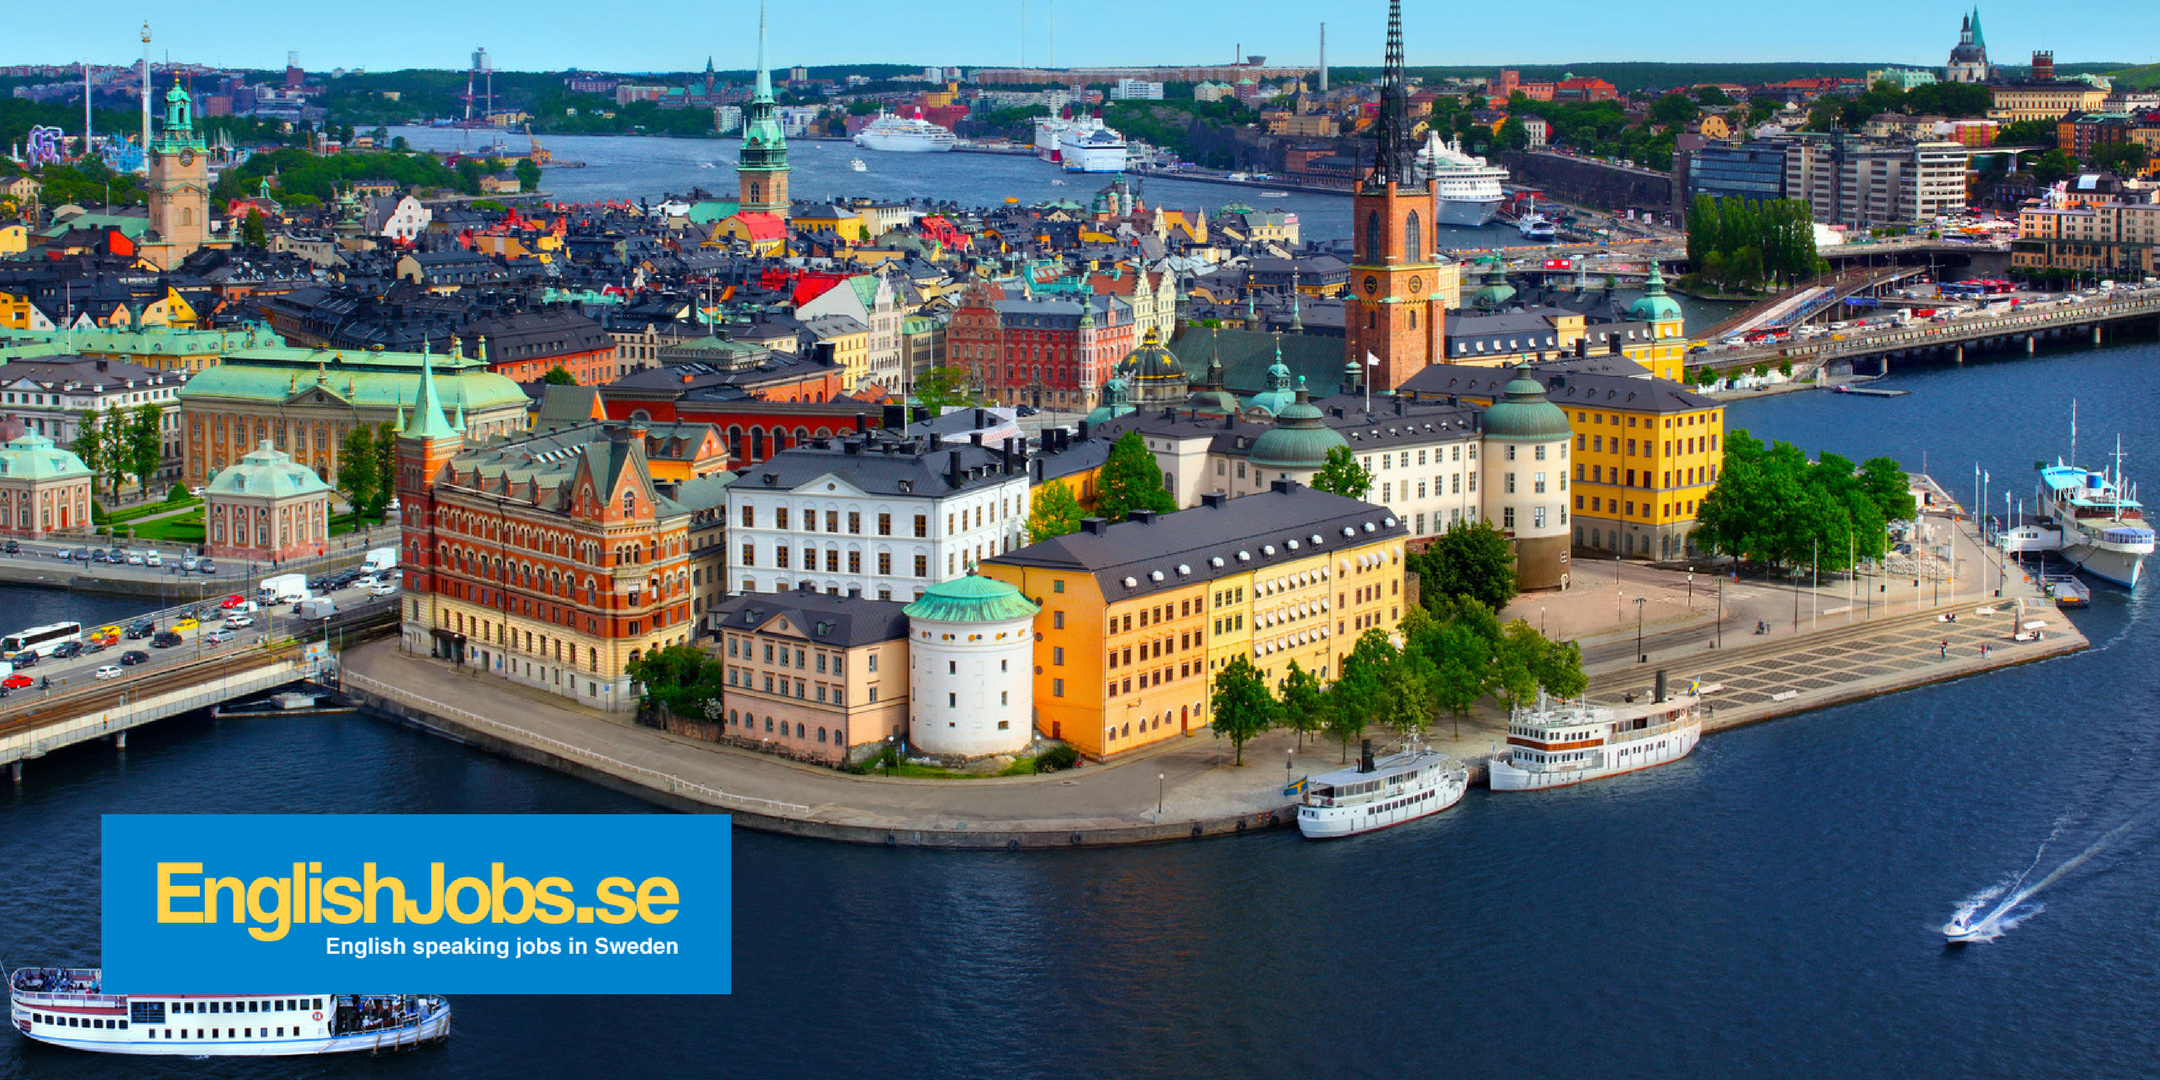 Work in Europe (Sweden, Denmark, Germany) - Your job search from Miami to Stockholm